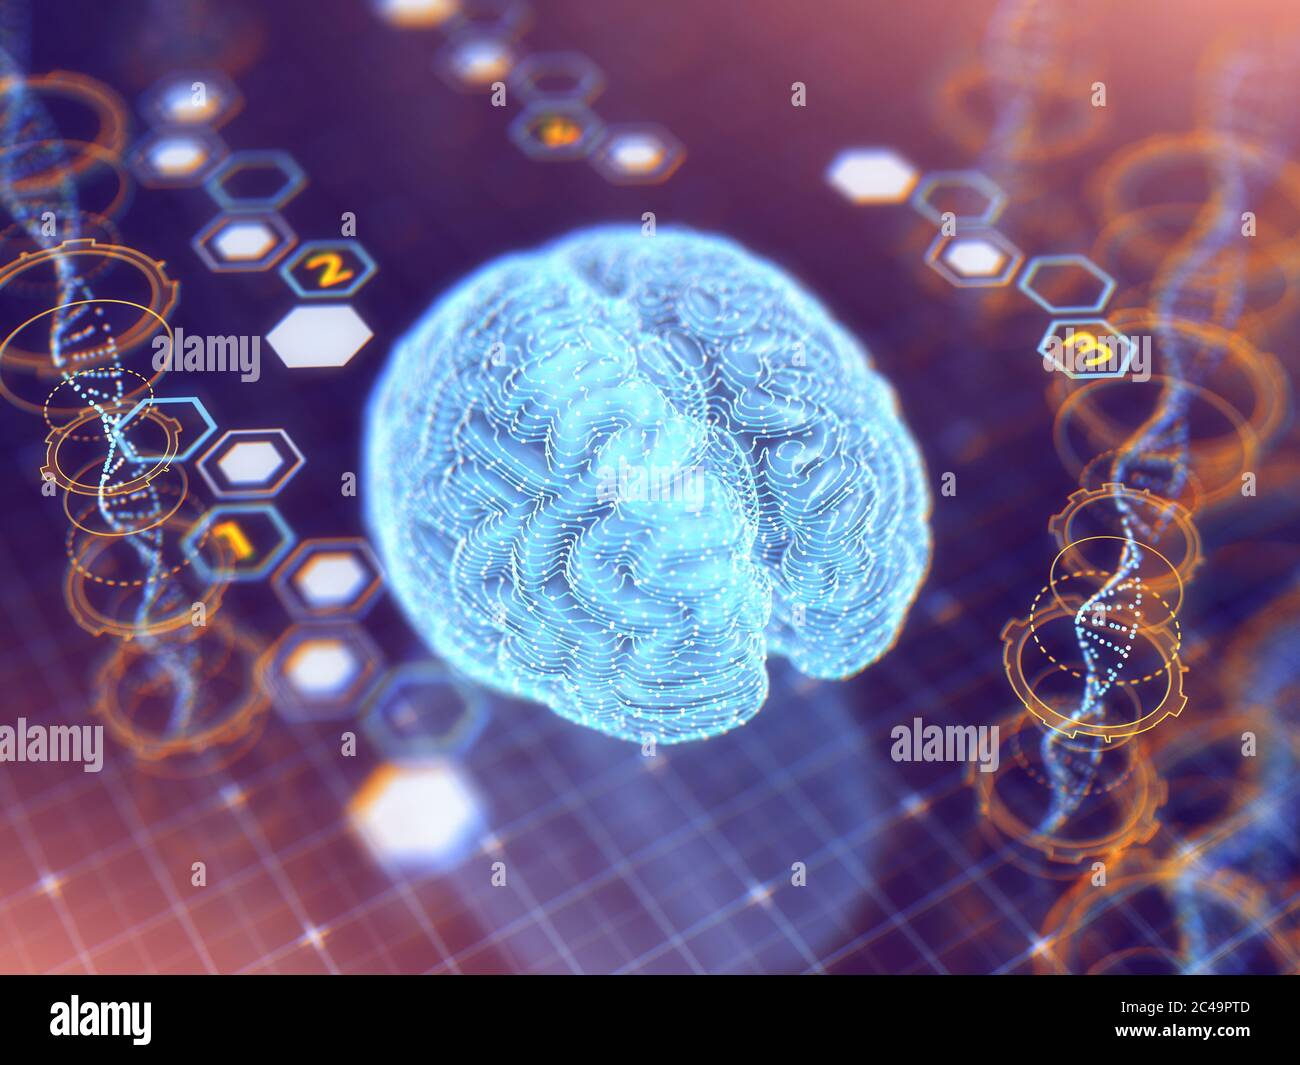 Artificial Intelligence concept background,Neural network modeled on human brain using deep learning algorithms for data analysis, Abstract AI Stock Photo